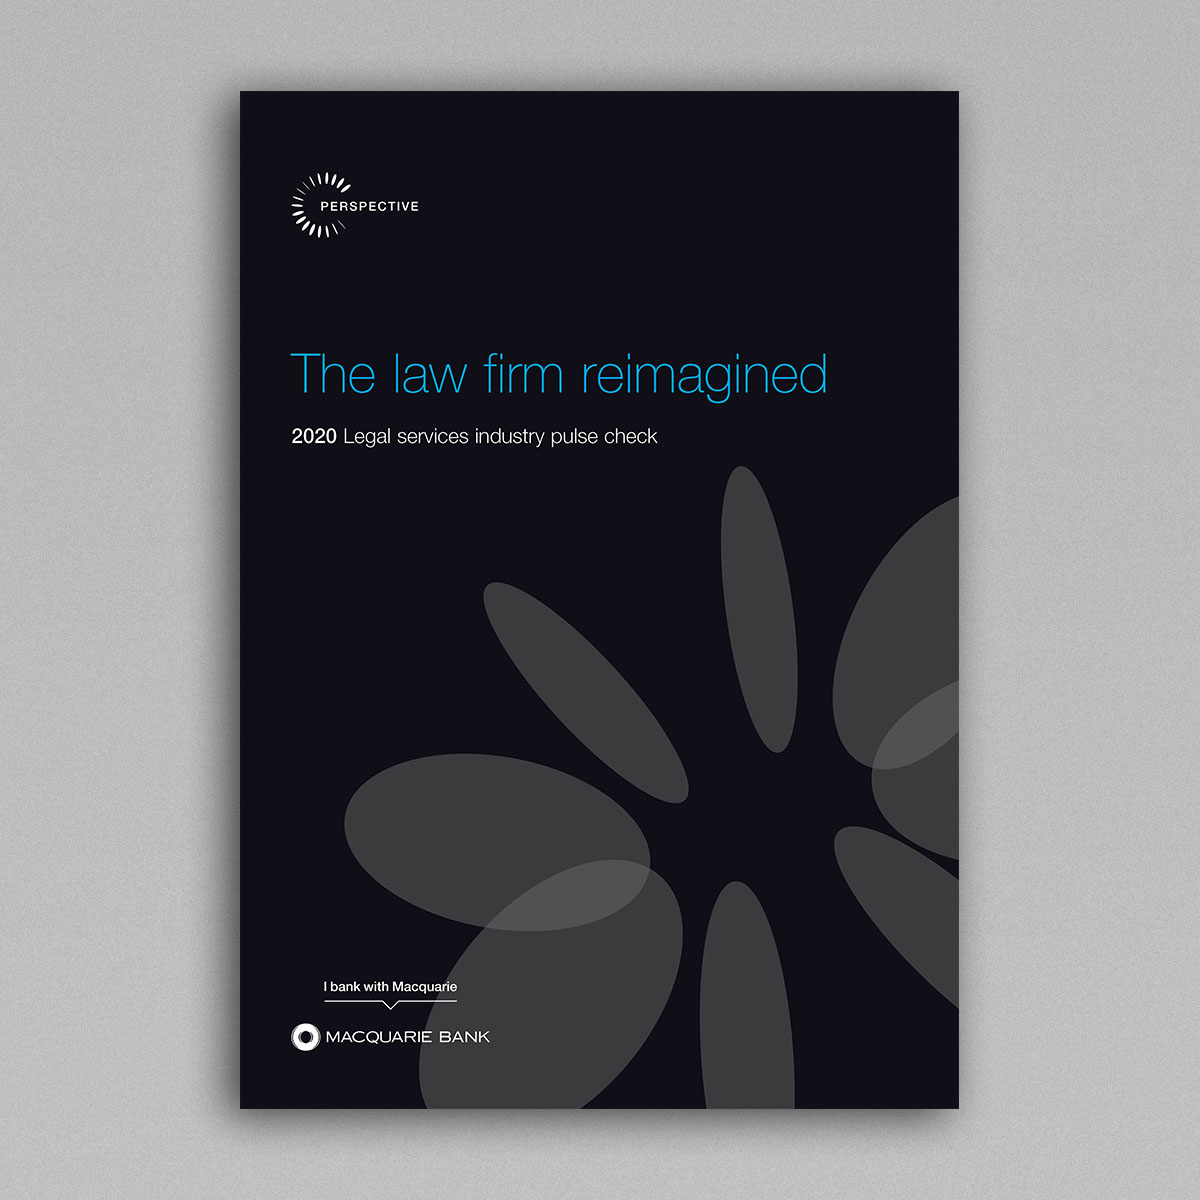 The law firm reimaged report